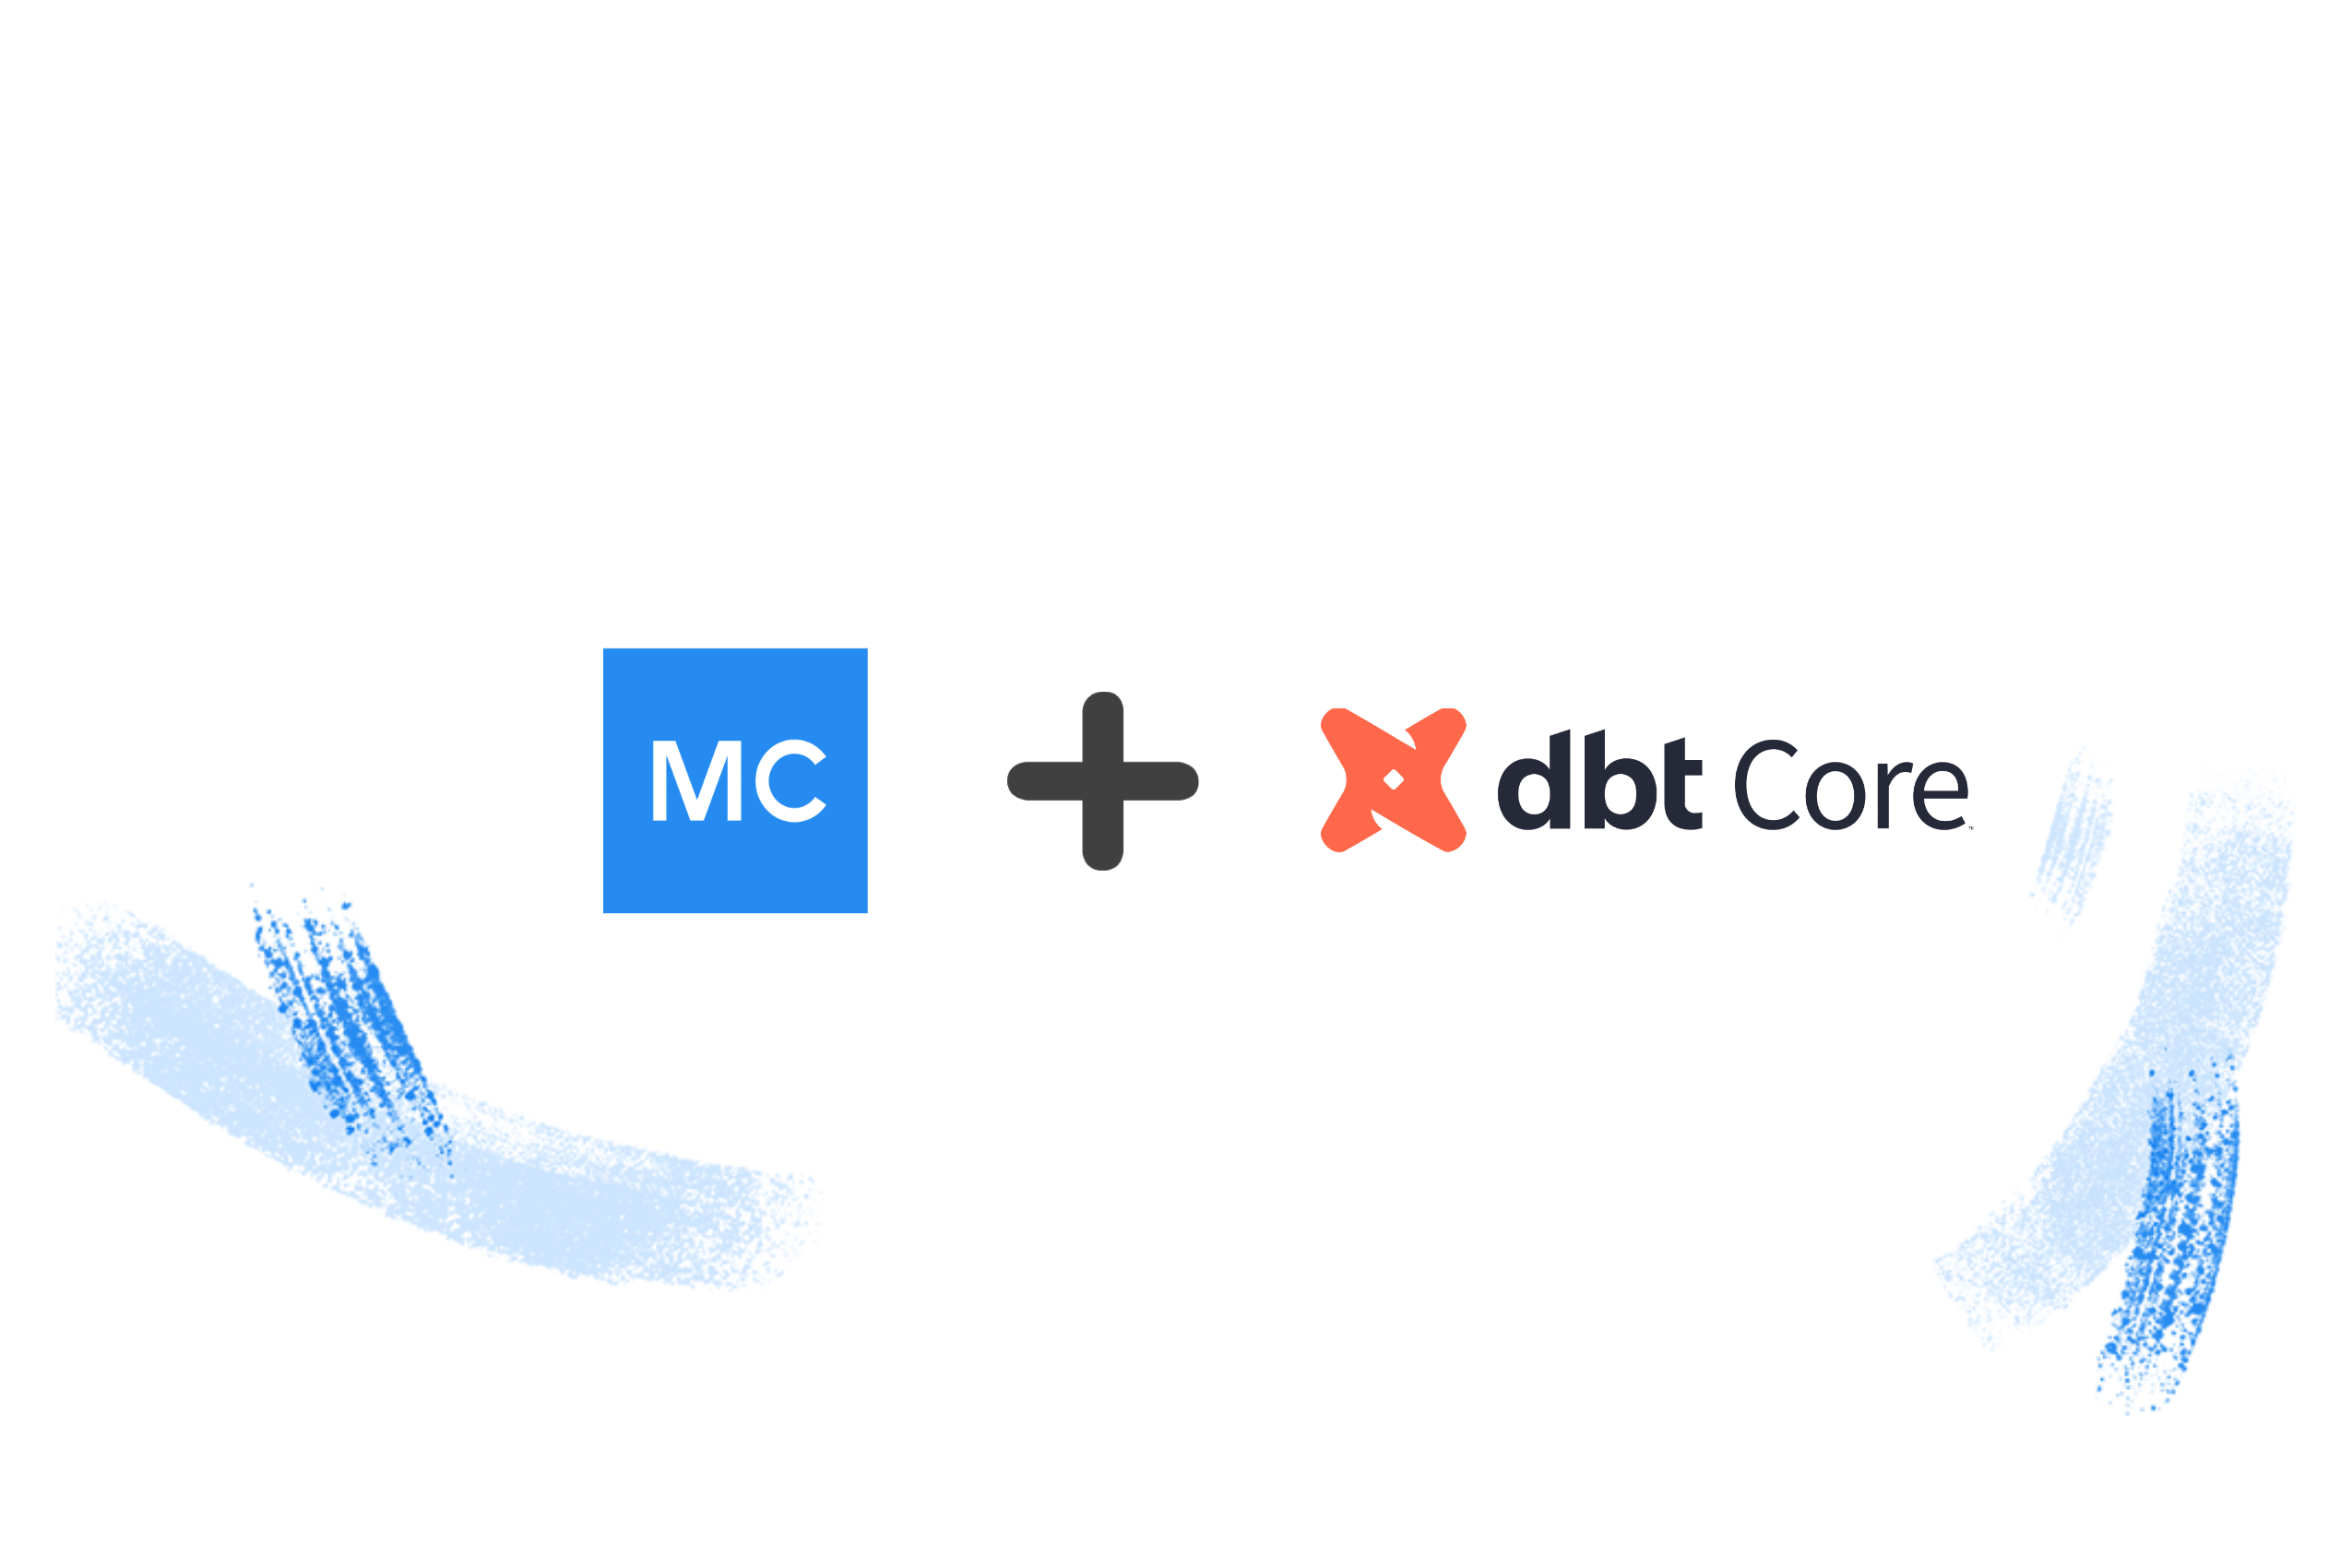 Monte Carlo Announces dbt Core Integration to Help Companies Ship Reliable Data Faster